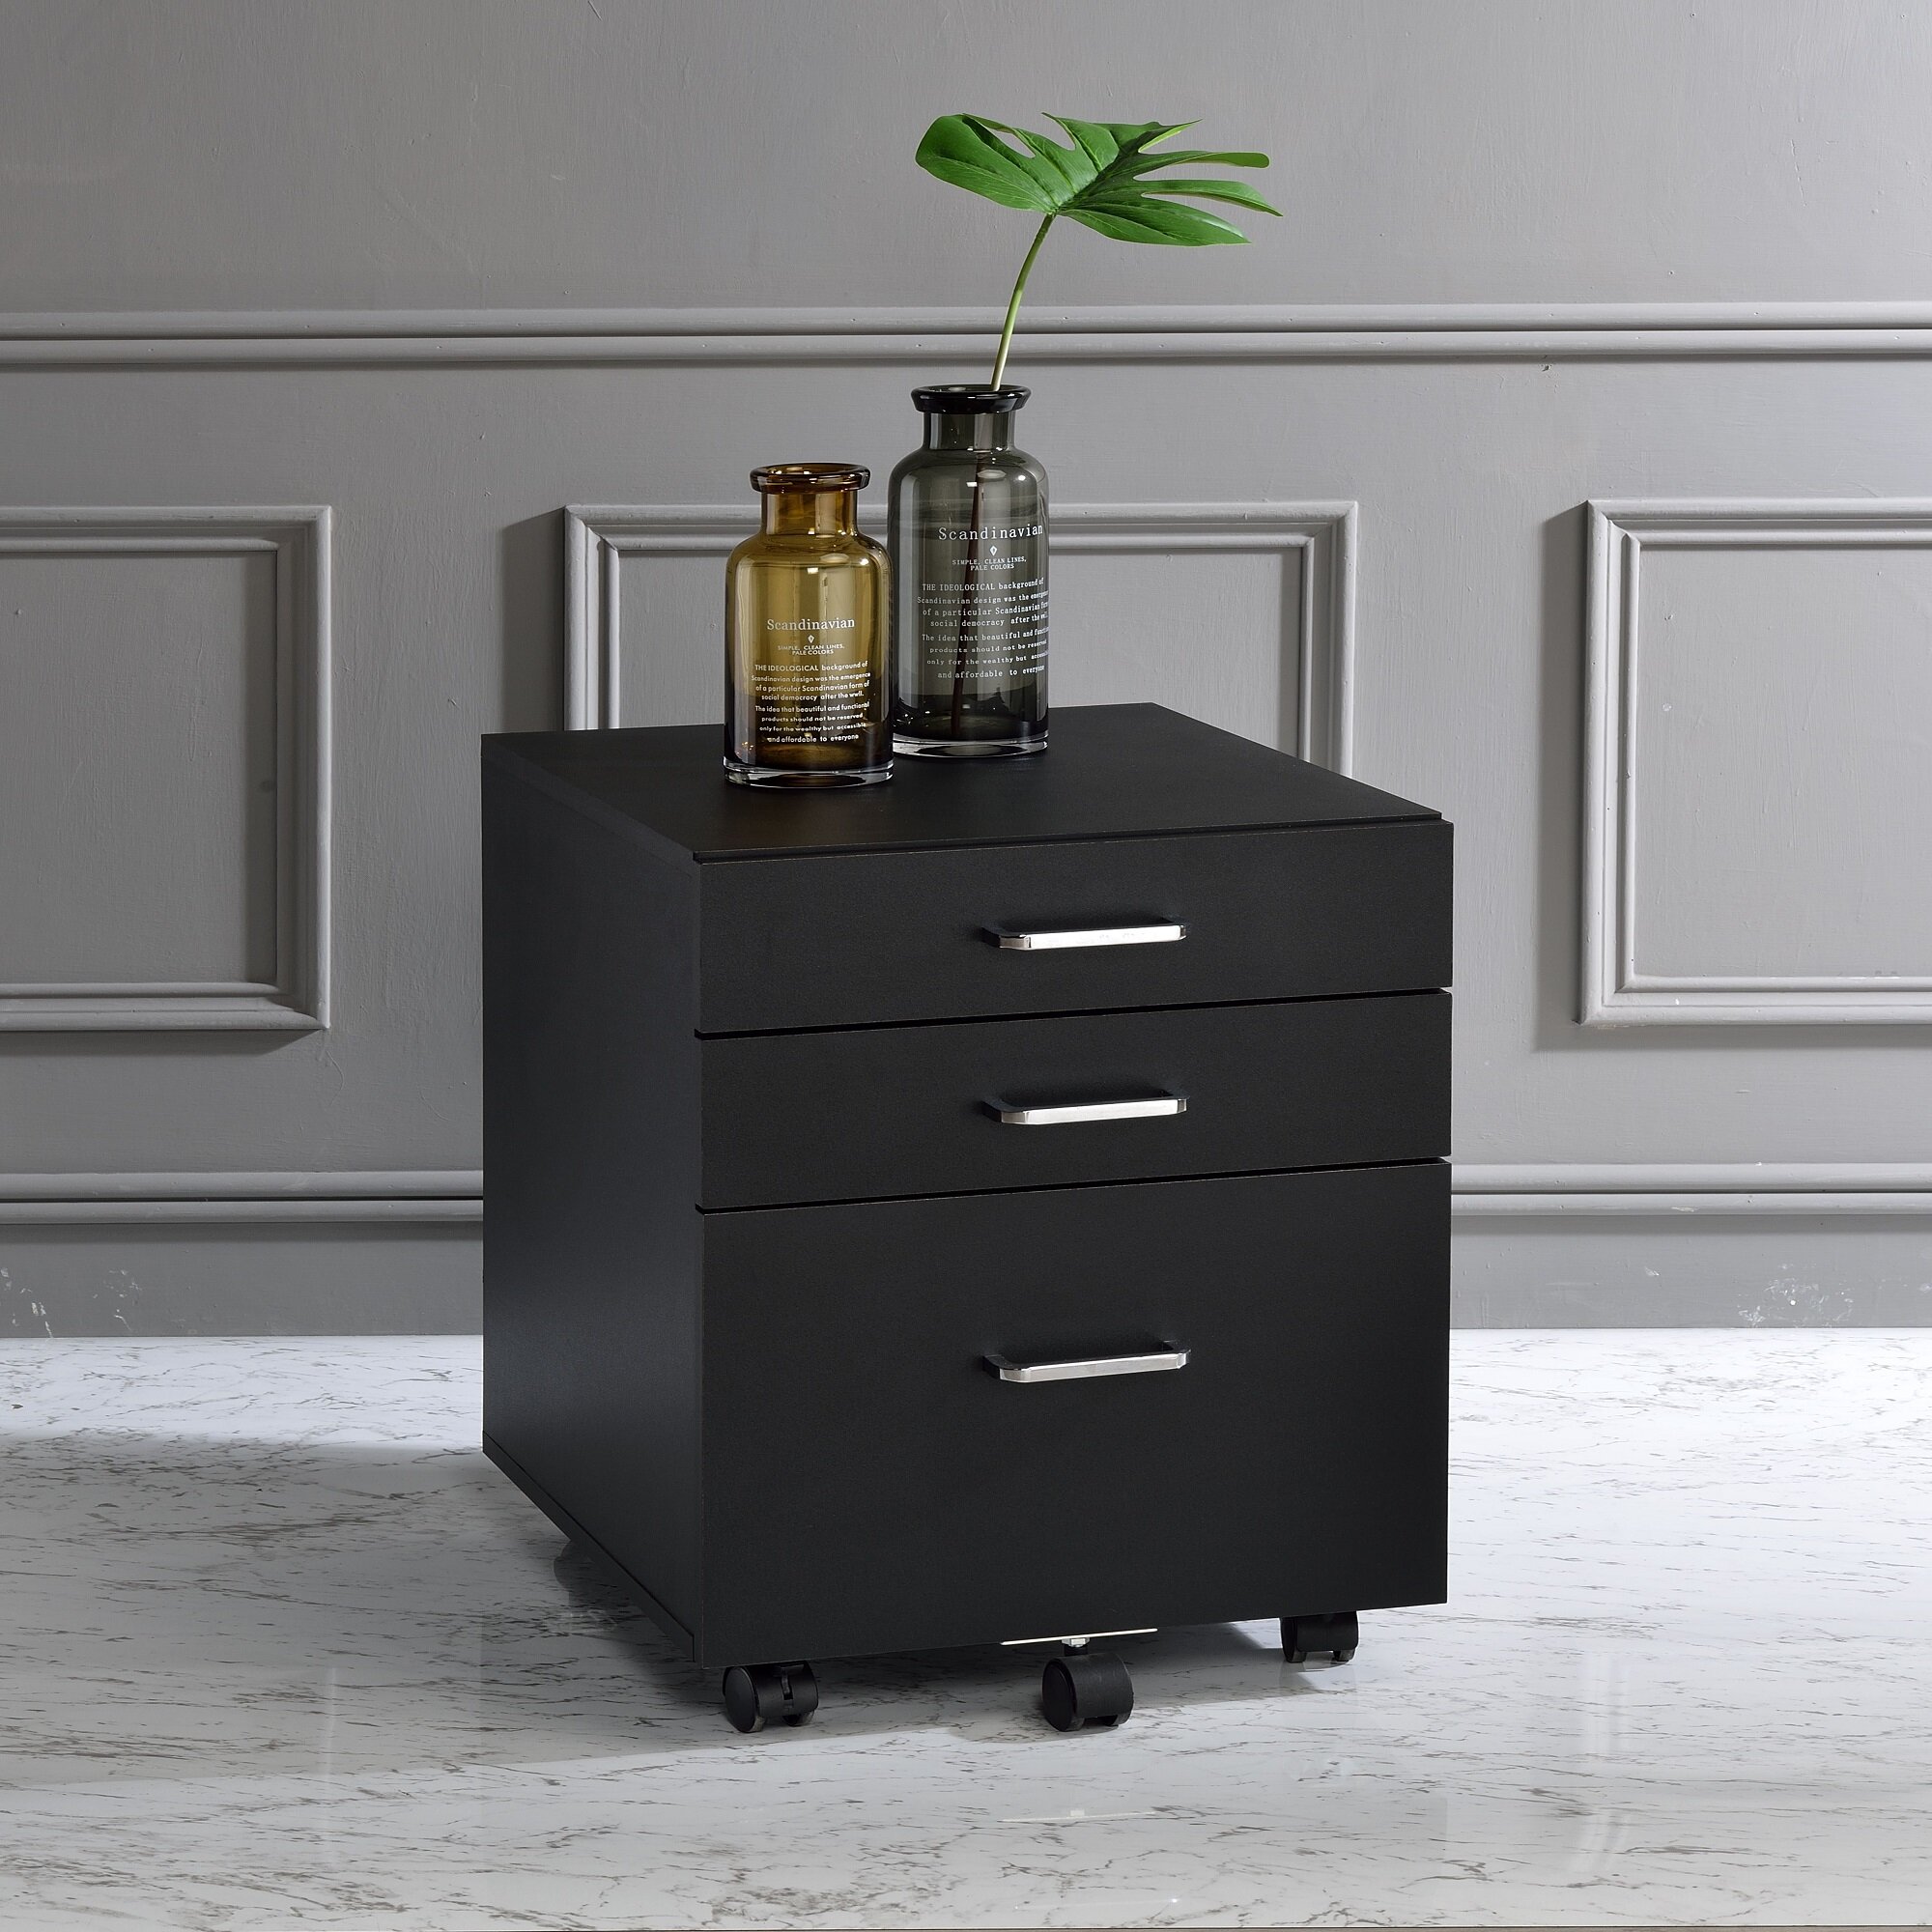 Details about   Metal Filing Cabinet Mobile File Cabinet w/Lock Drawers Legal/Letter White/Black 